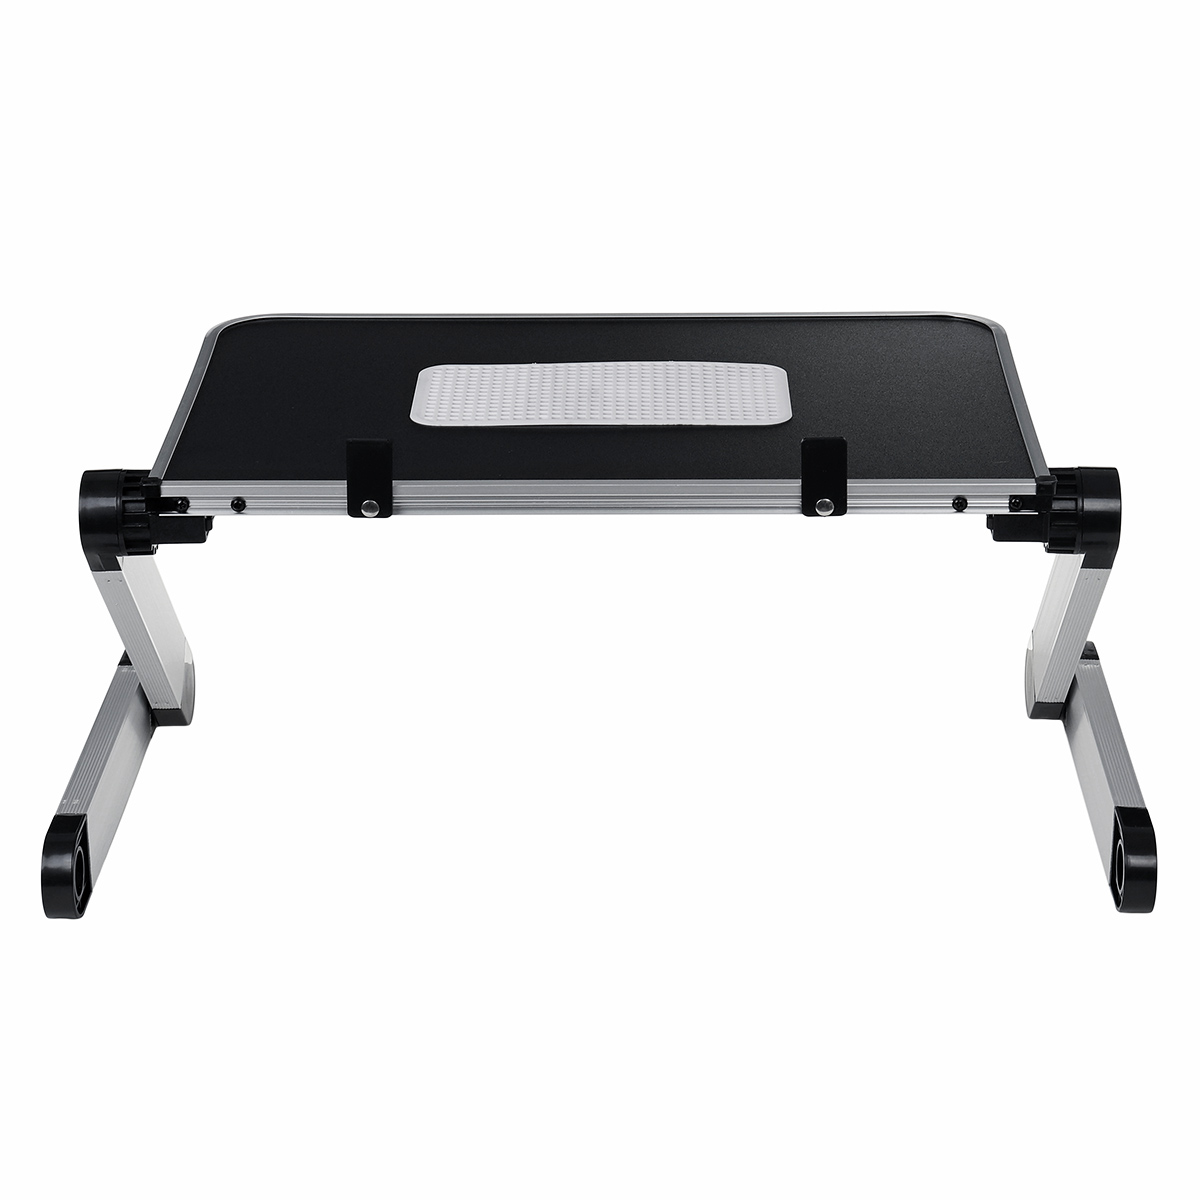 4026cm-Enlarge-Foldable-with-Cooling-Fan-Hole-Aluminum-Laptop-Computer-Desk-Table-TV-Bed-Computer-Ma-1653497-5